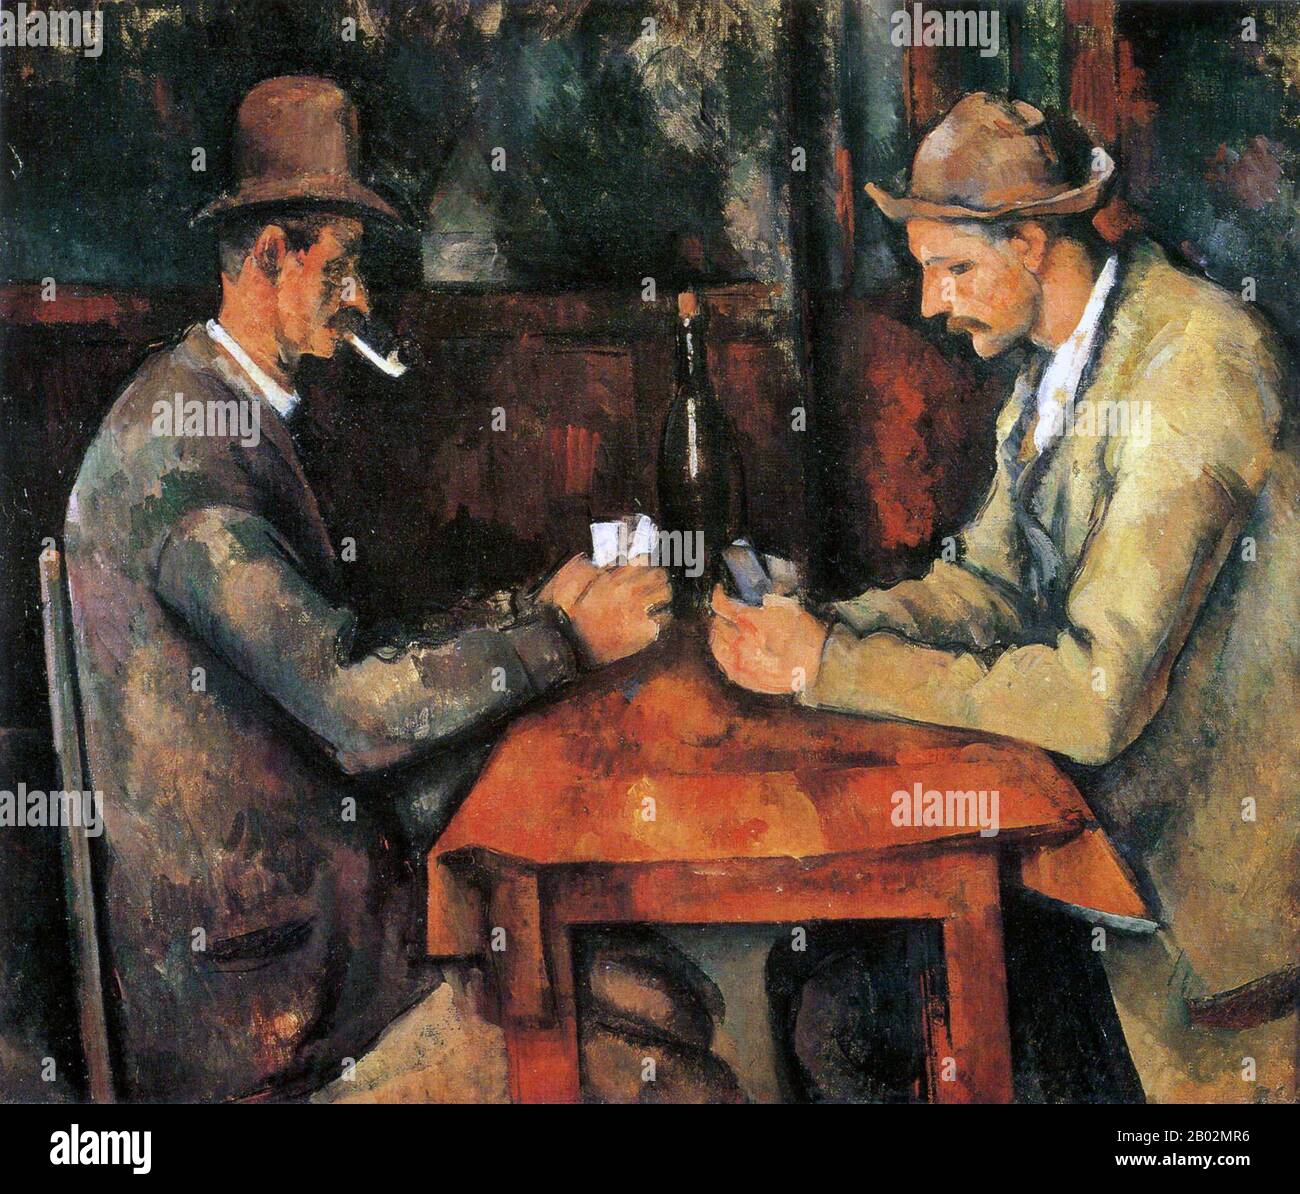 The Card Players is a series of oil paintings by the French Post-Impressionist artist Paul Cézanne. Painted during Cézanne's final period in the early 1890s, there are five paintings in the series. The versions vary in size and in the number of players depicted.  Cézanne also completed numerous drawings and studies in preparation for The Card Players series. One version of The Card Players was sold in 2011 to the Royal Family of Qatar for a price variously estimated at between $250 million and $300 million, making it the most expensive work of art ever sold. Stock Photo